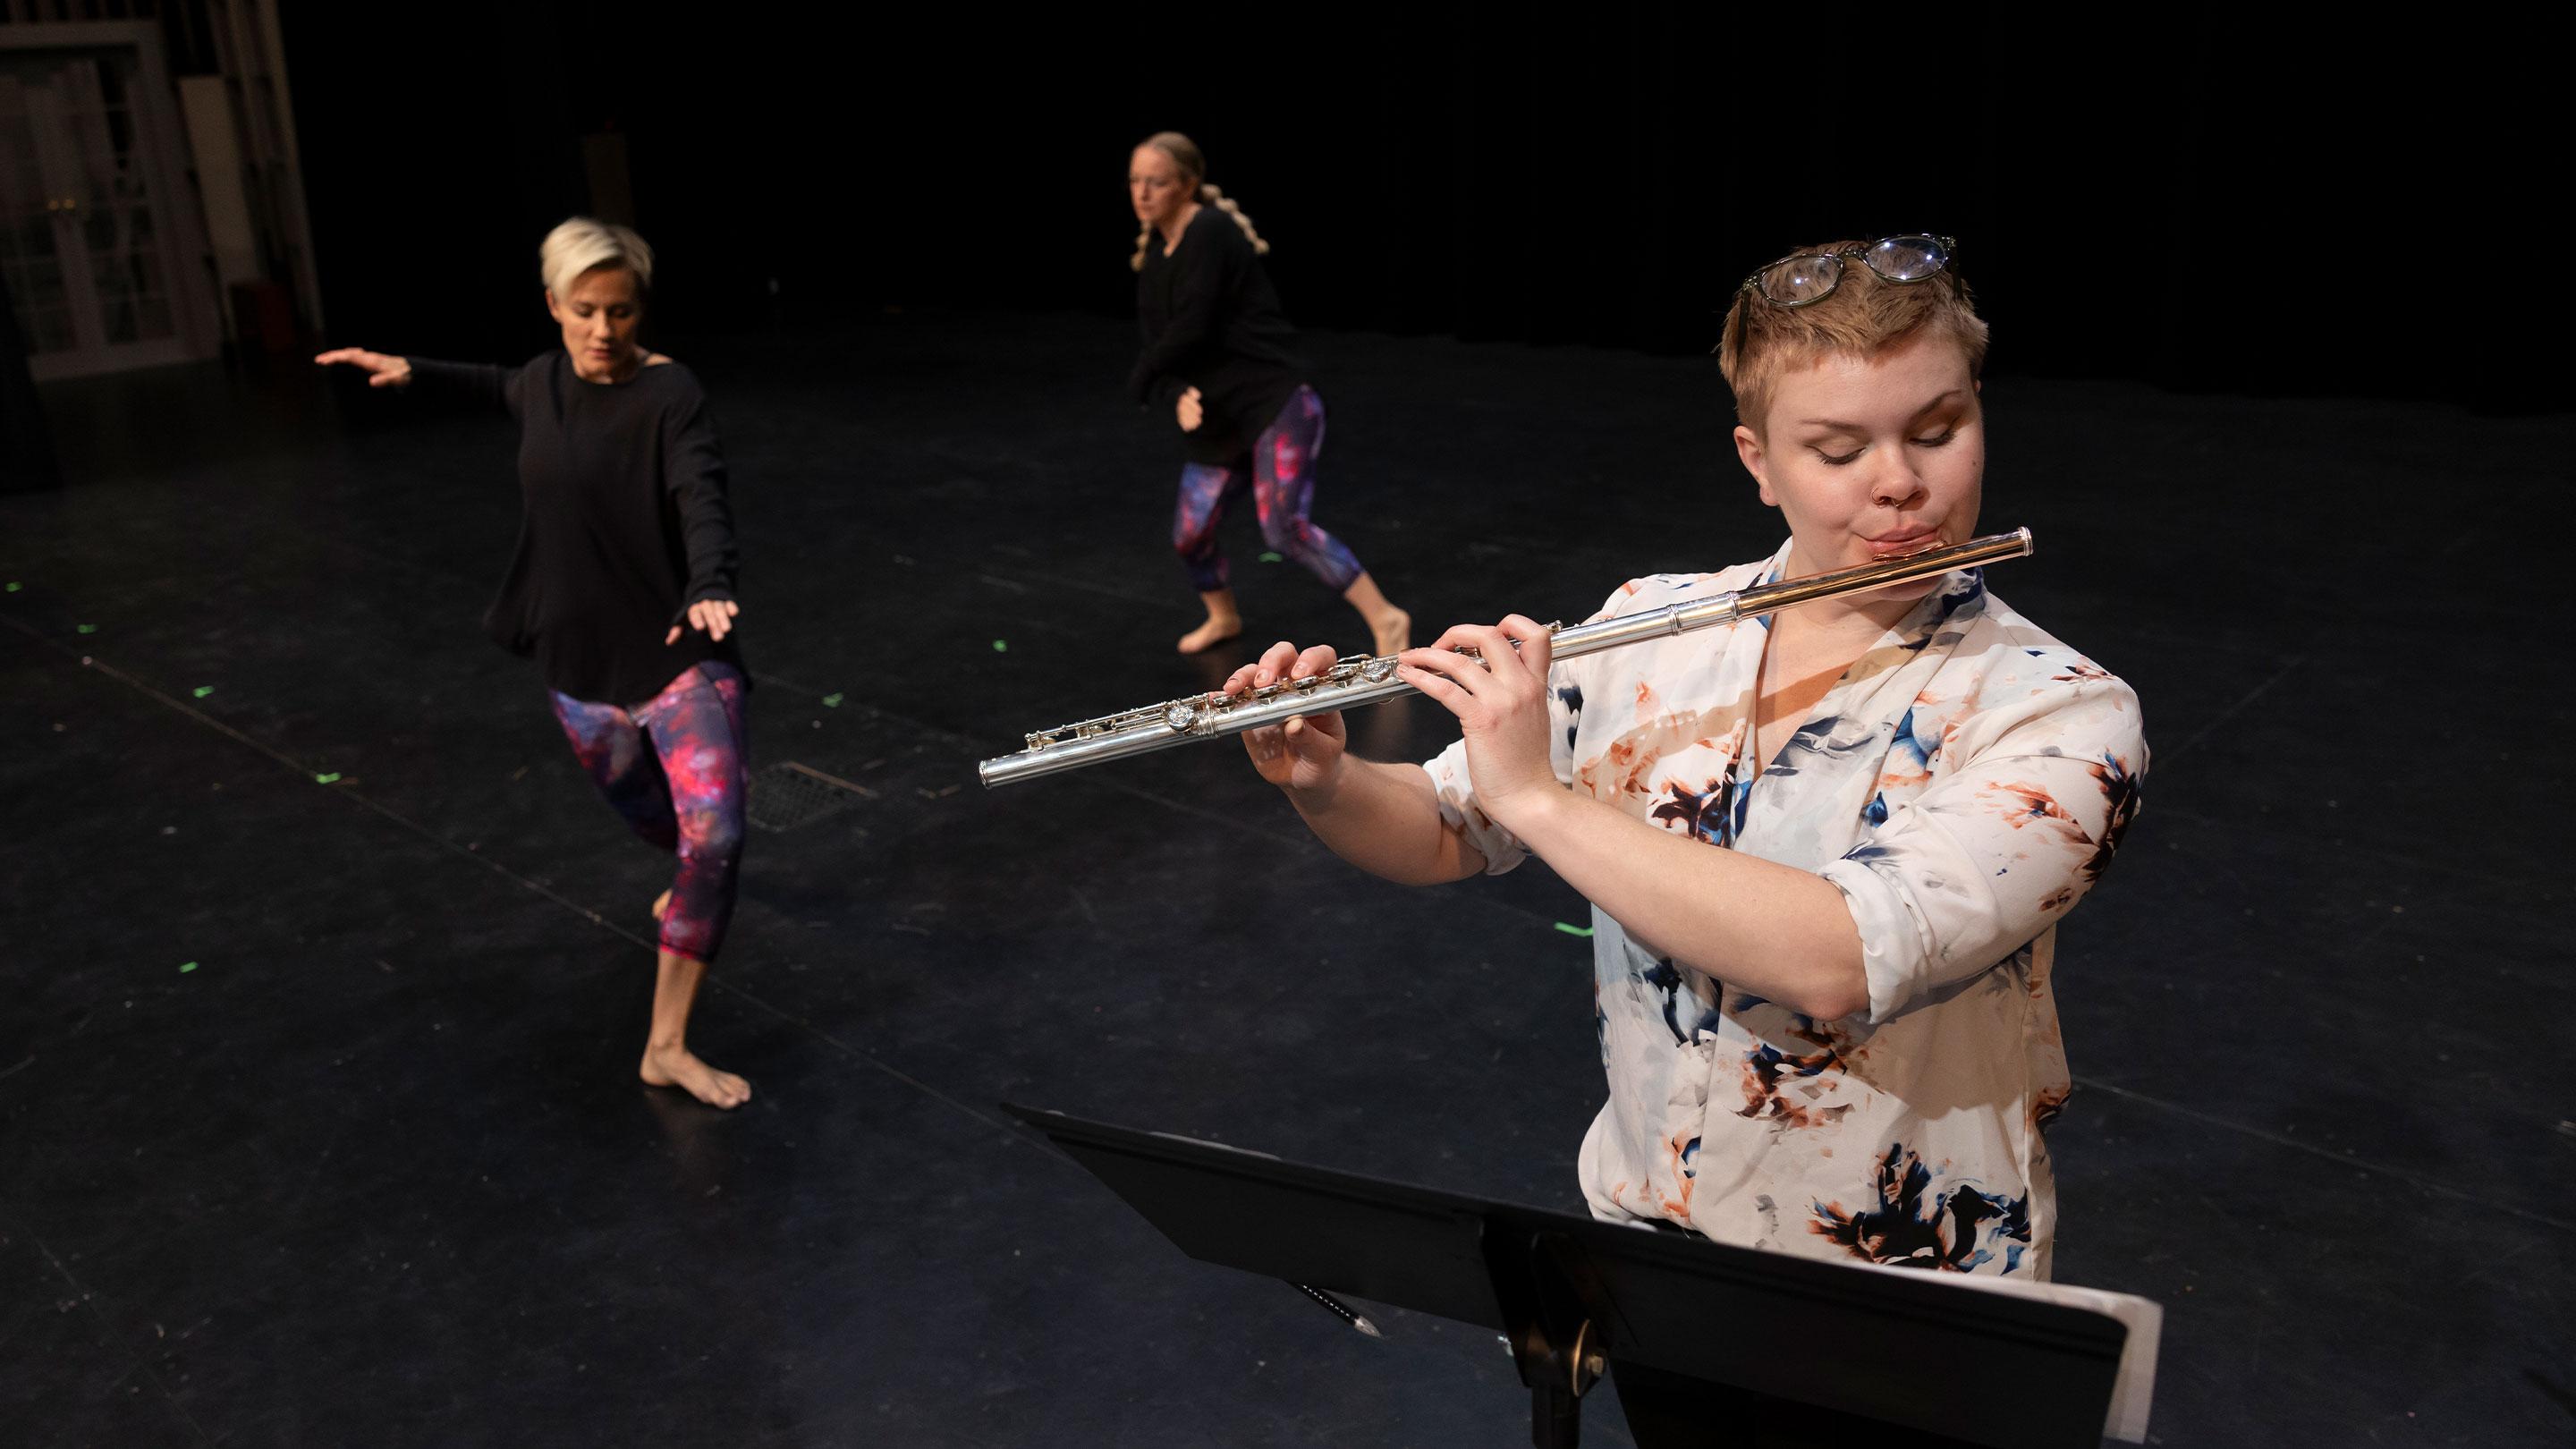 student plays flute while two students dance